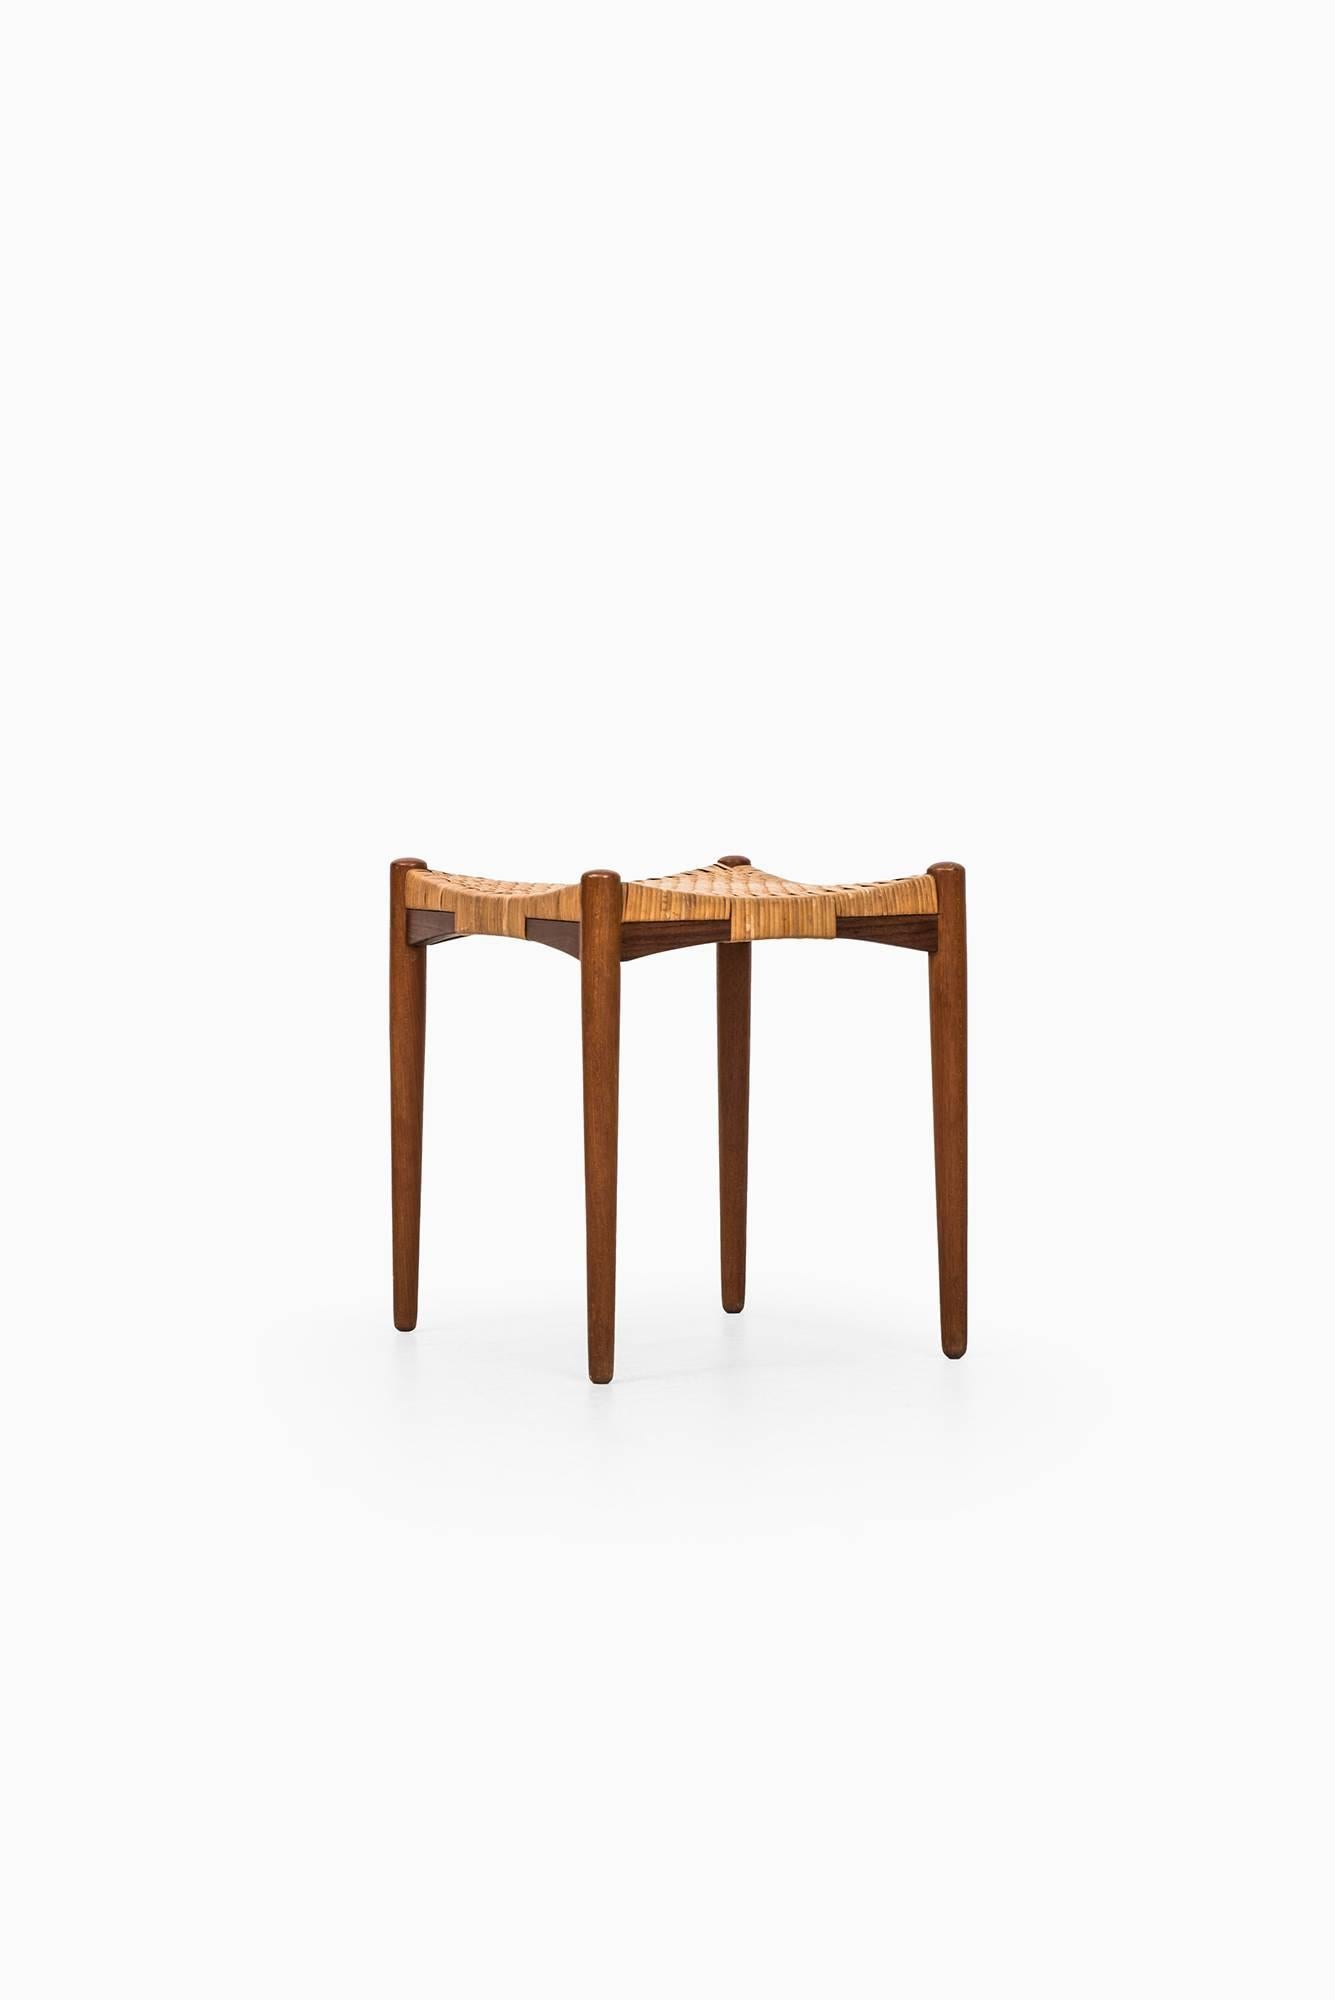 Mid-20th Century Stool in Teak and Cane Attributed to Aksel Bender Madsen & Ejnar Larsen For Sale